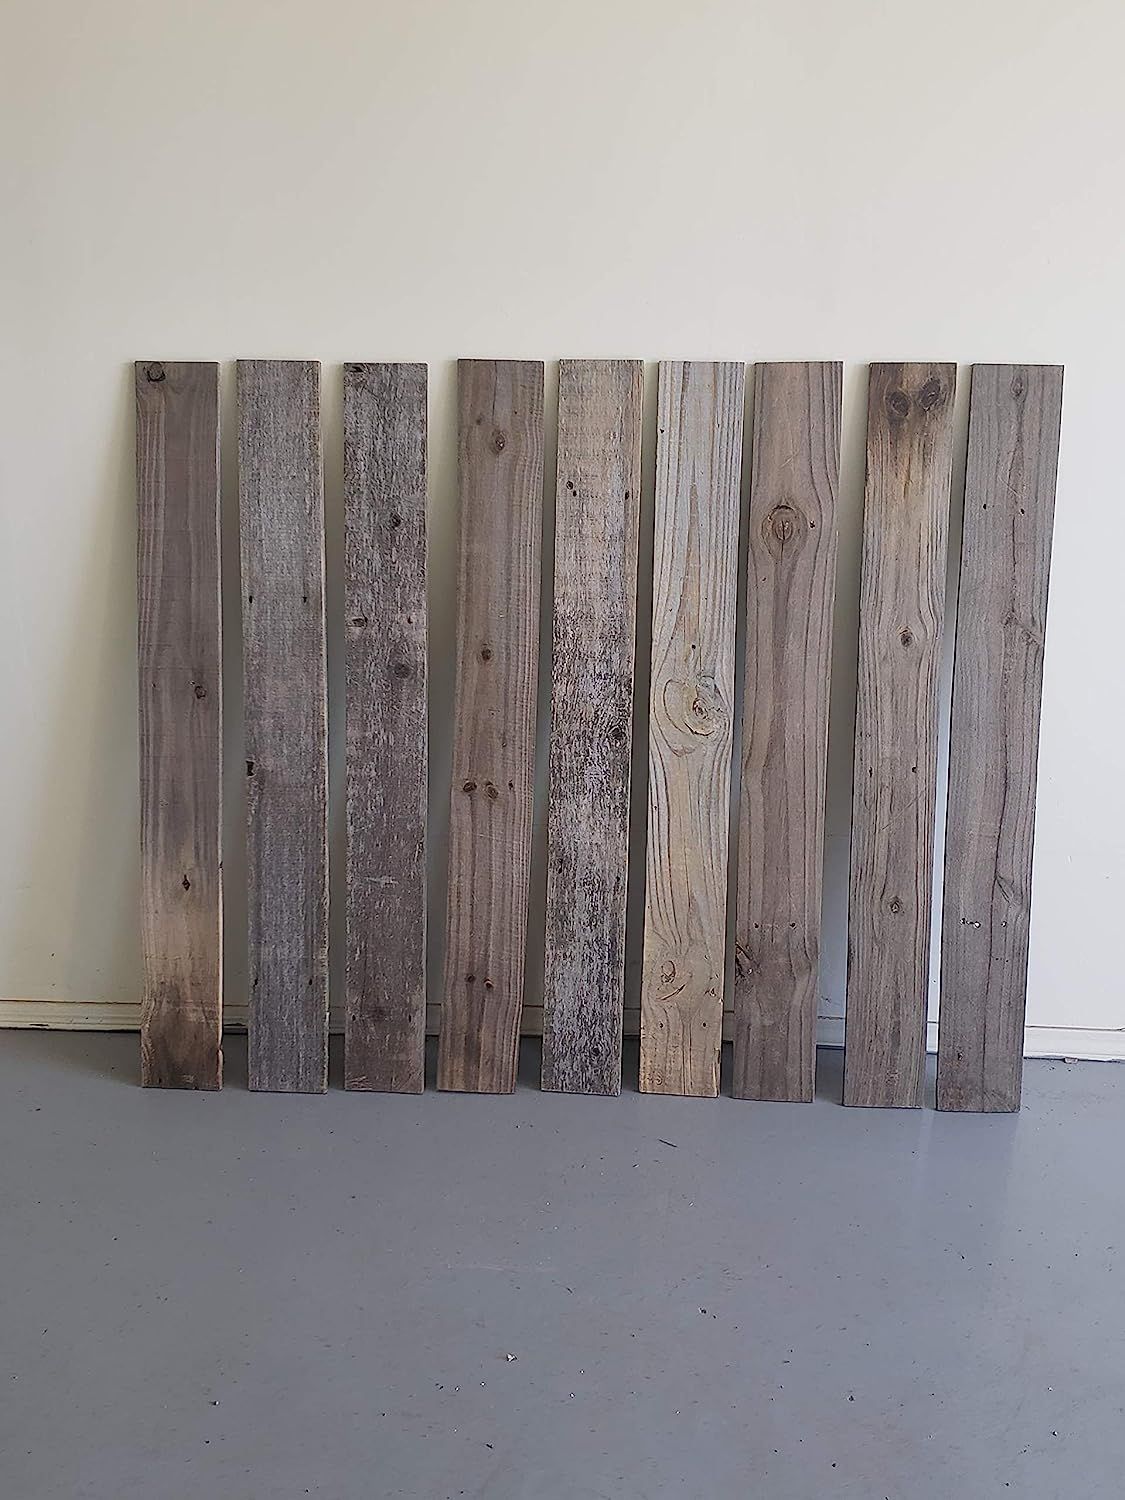 Rustic Weathered Reclaimed Wood Planks for DIY Crafts, Projects and Decor (9 Planks - 5.5"x48") | Amazon (US)